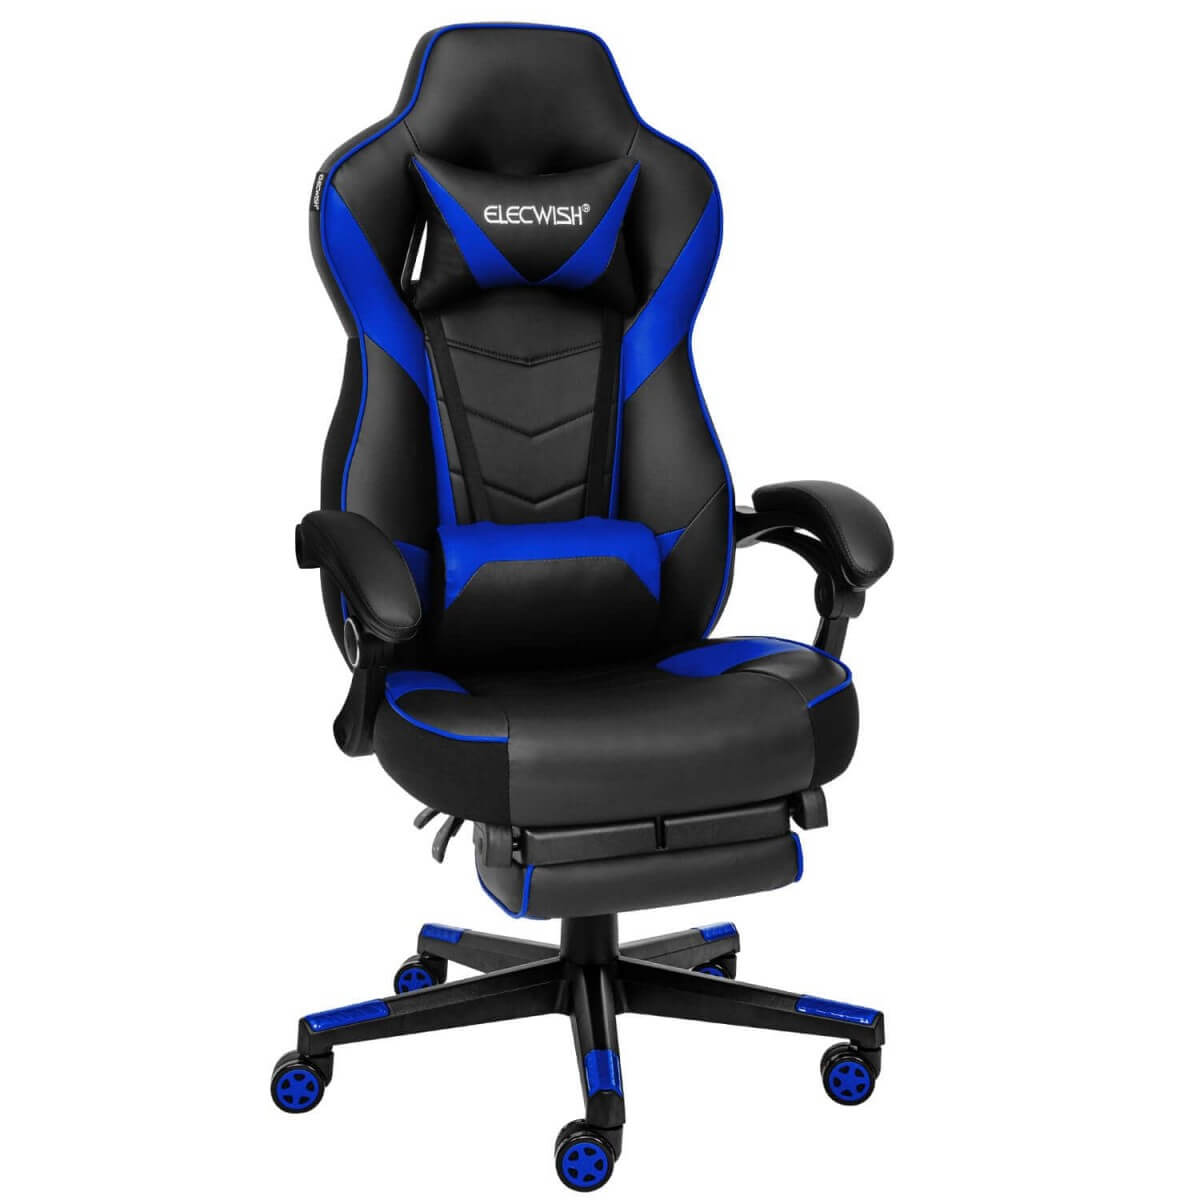 Elecwish Video Game Chairs Blue Gaming Chair With Footrest OC087